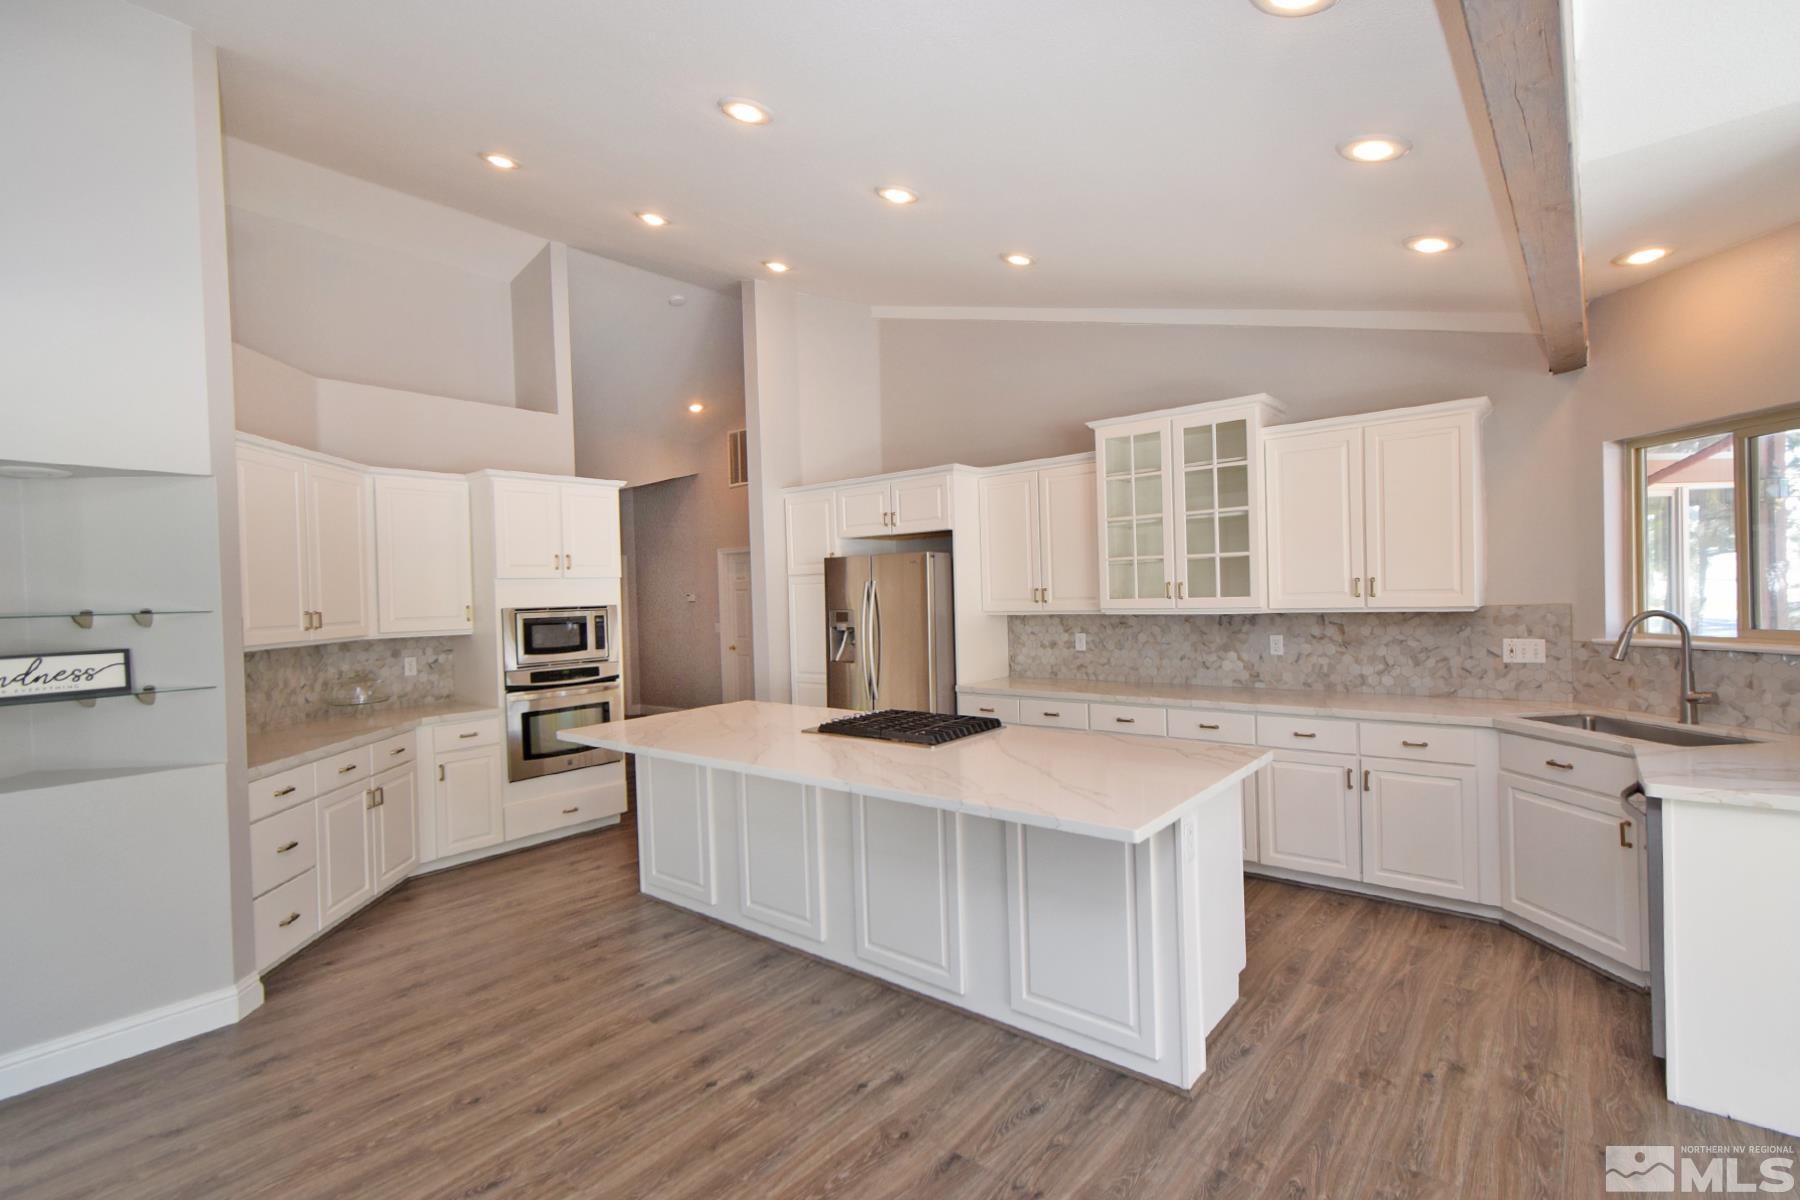 a large kitchen with cabinets a sink and appliances